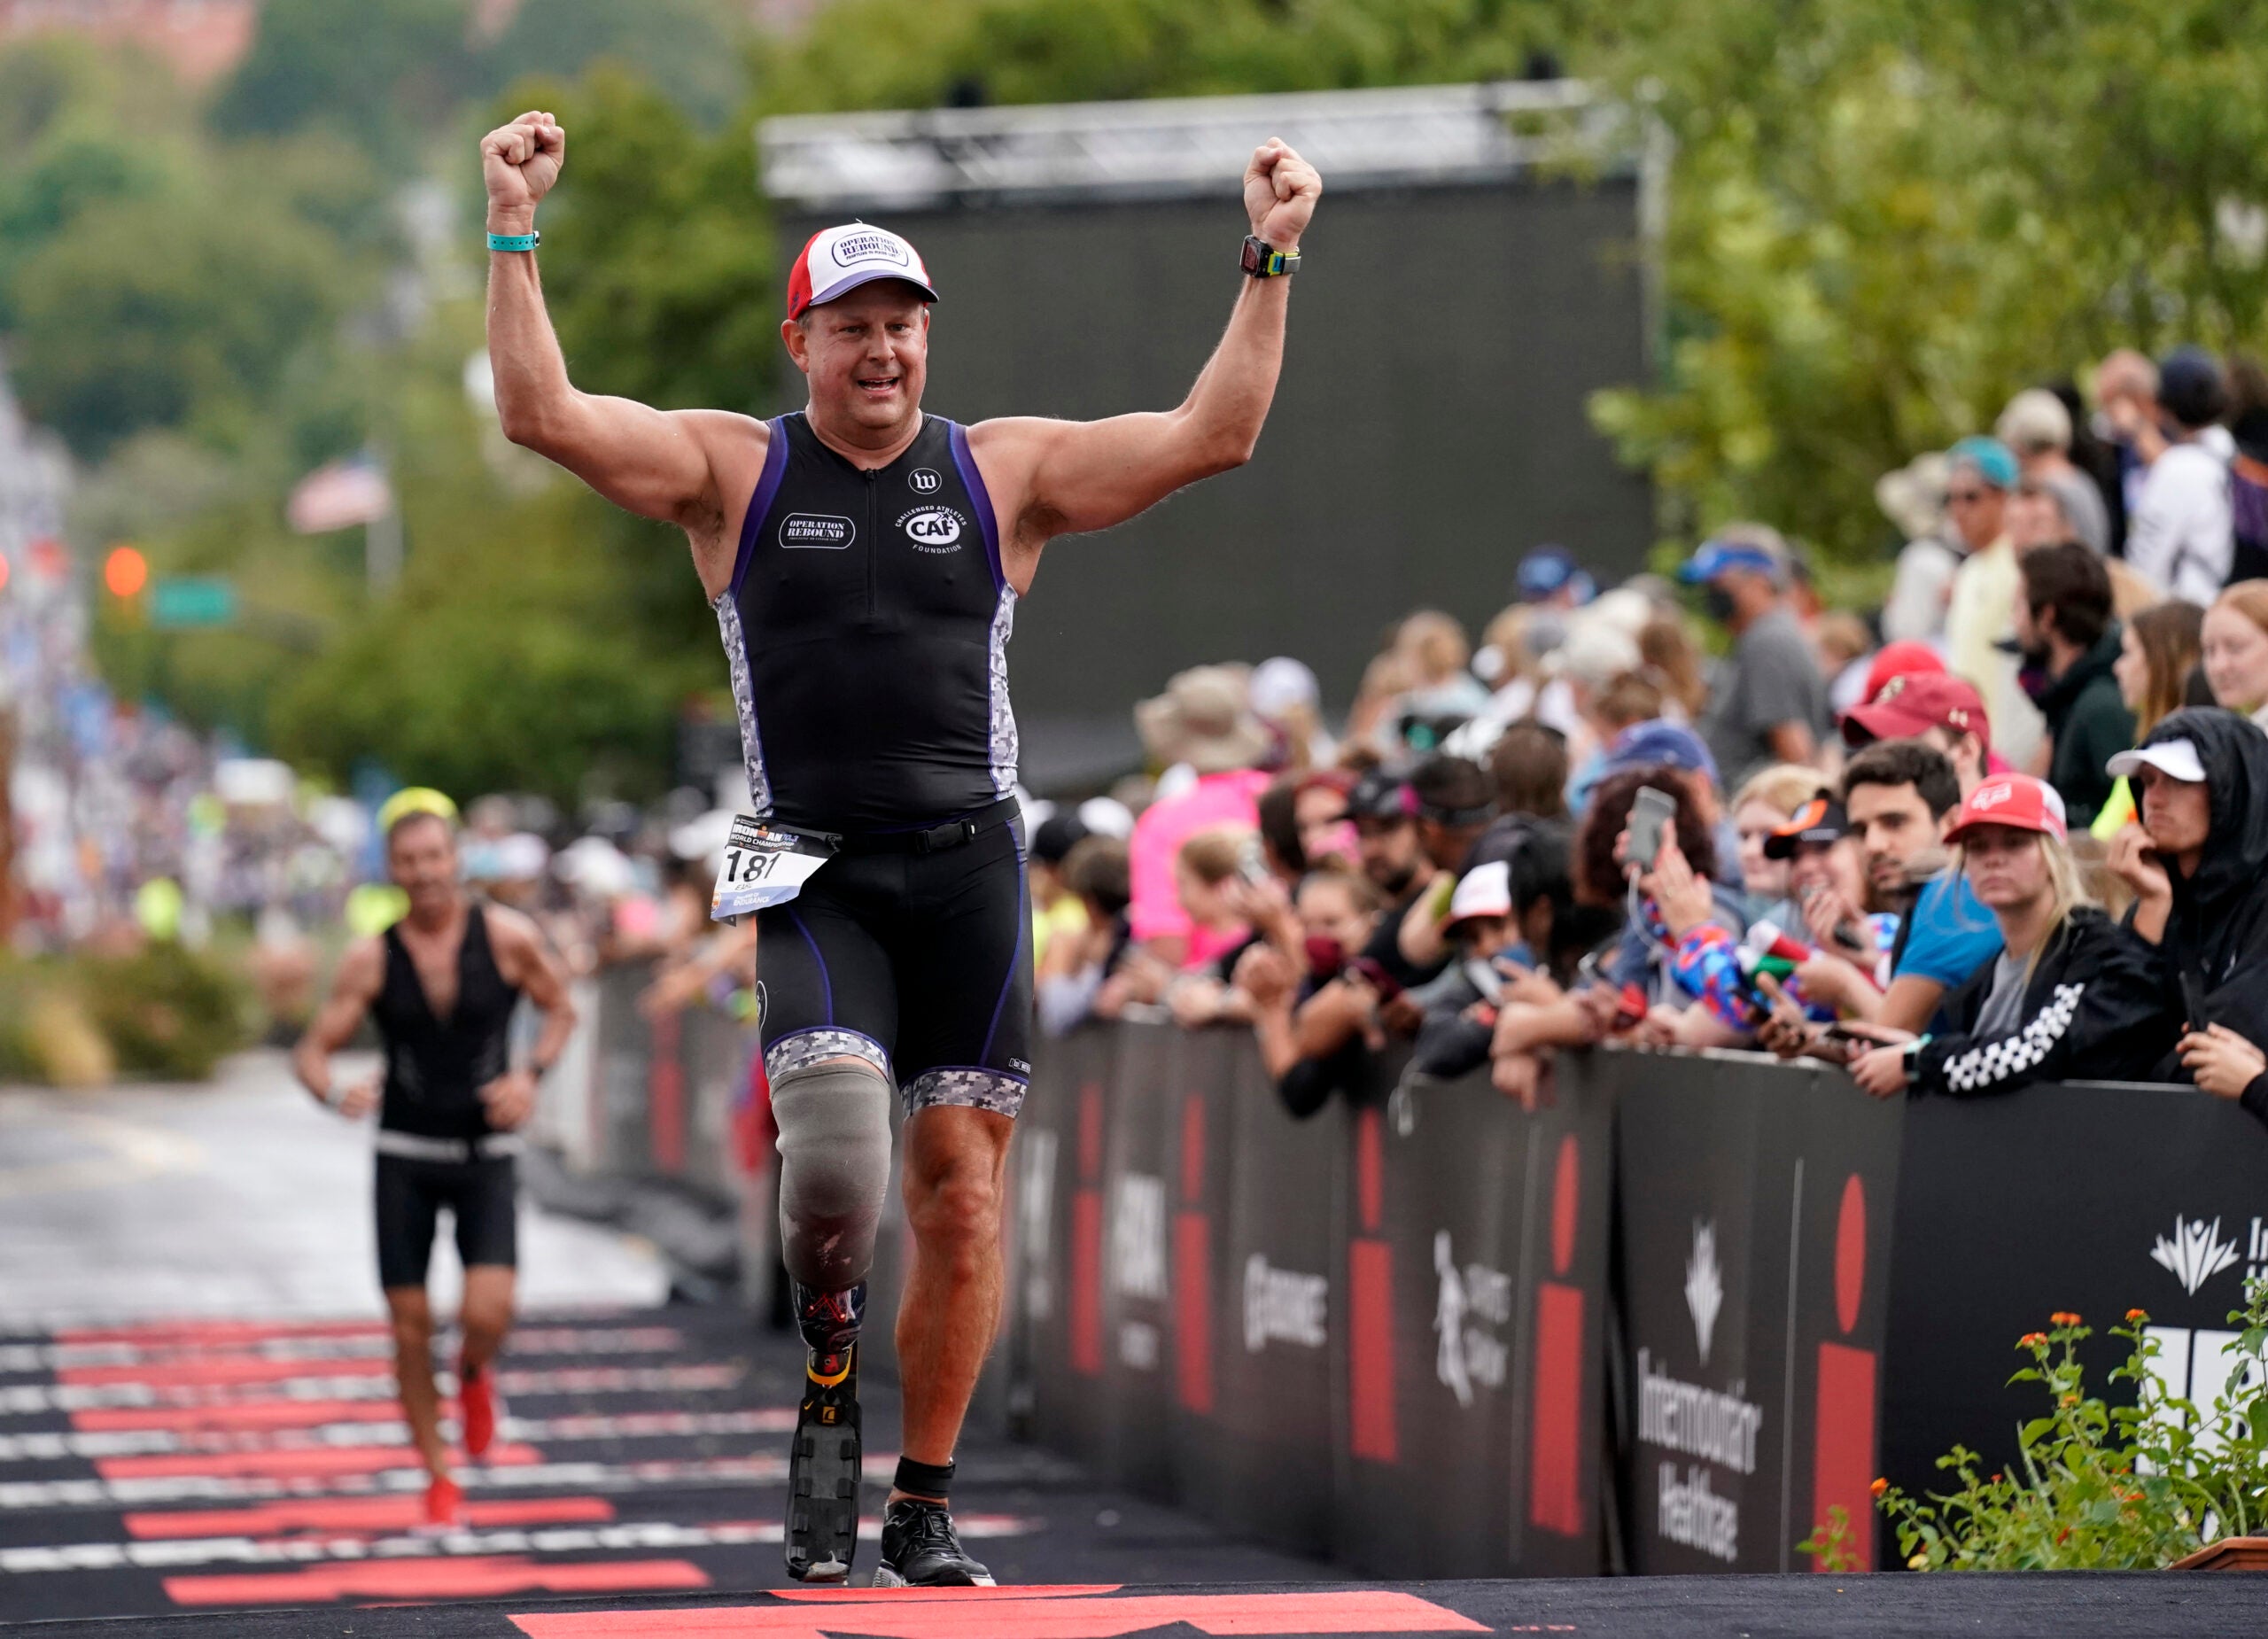 An athlete crosses the finish line of an Ironman 70.3 race